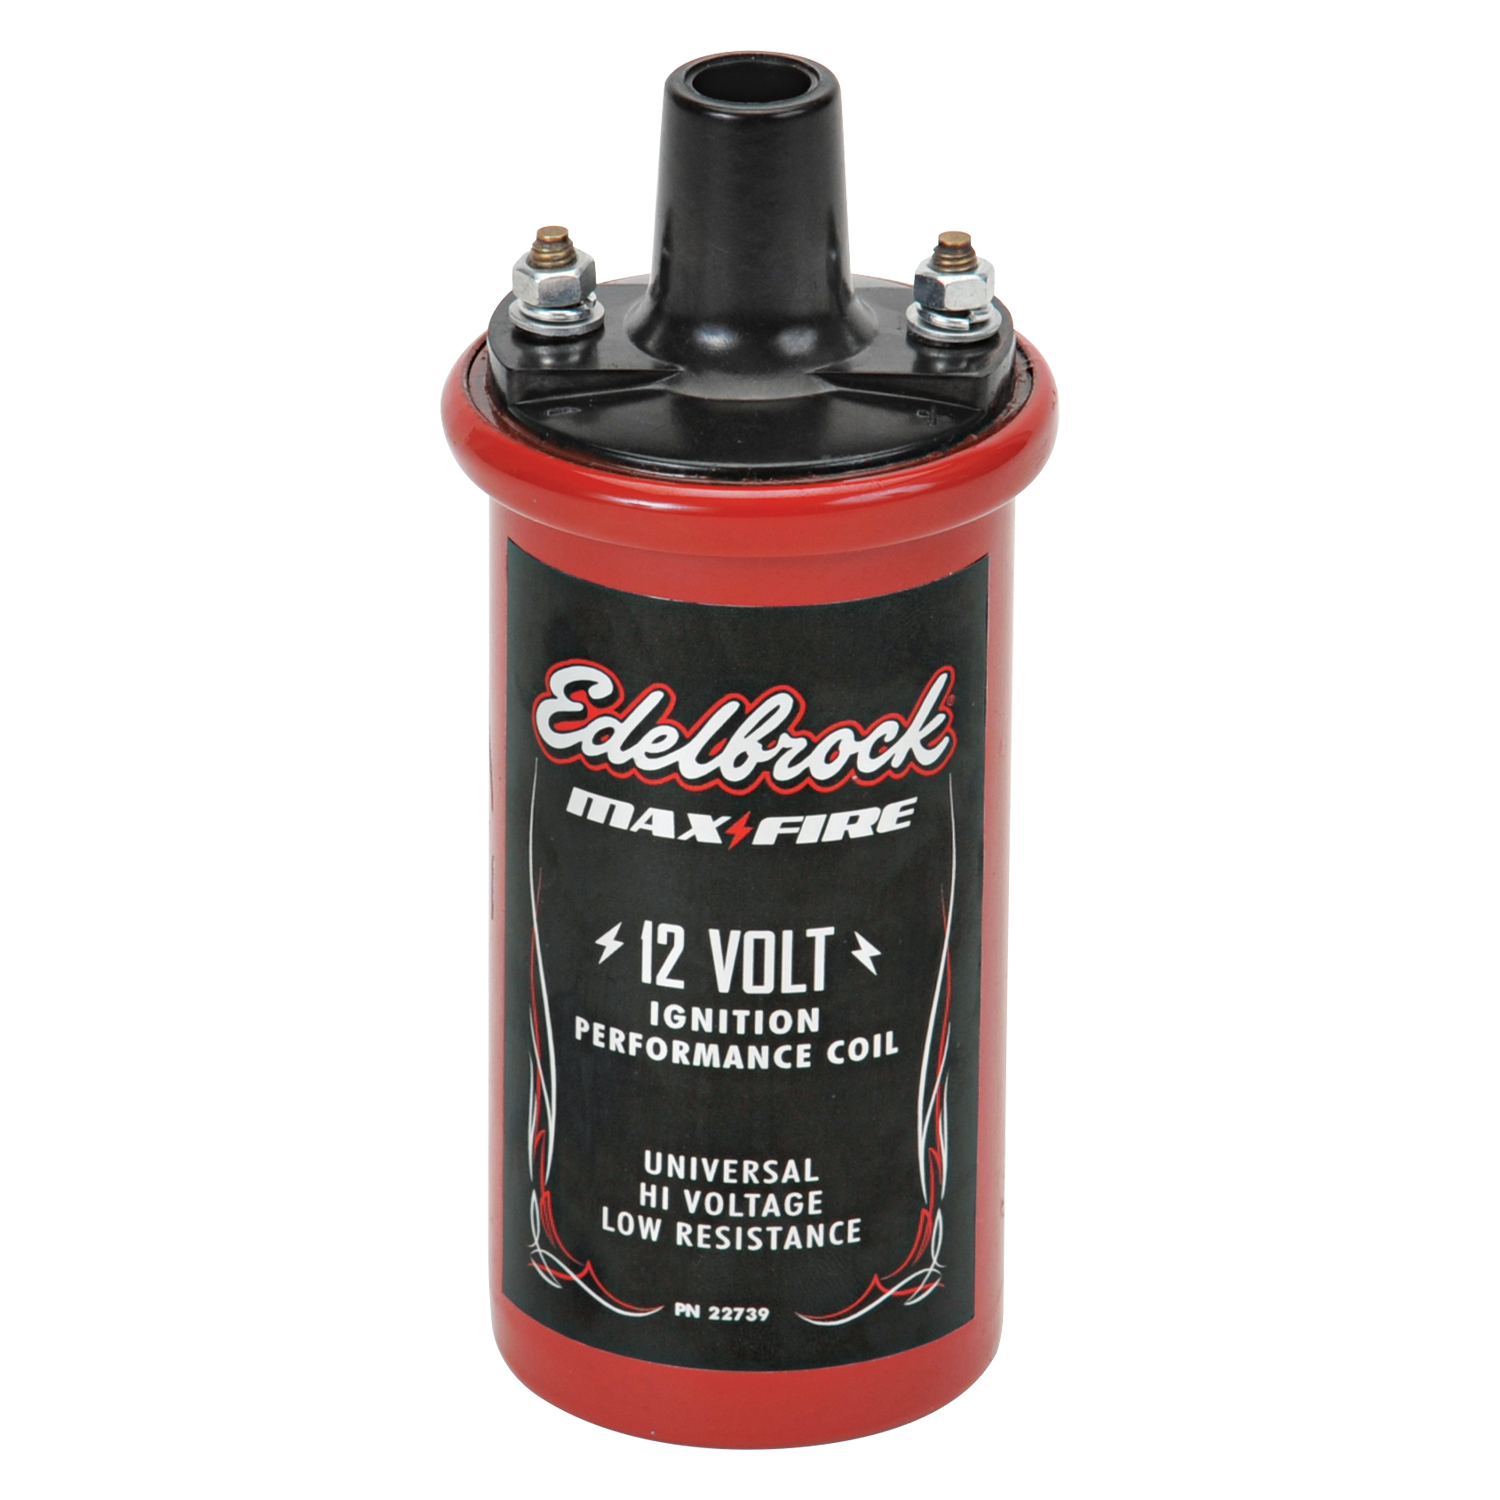 Universal 12V cannister-style w/ primary resistance 1.4 ohms & output of 42000V.